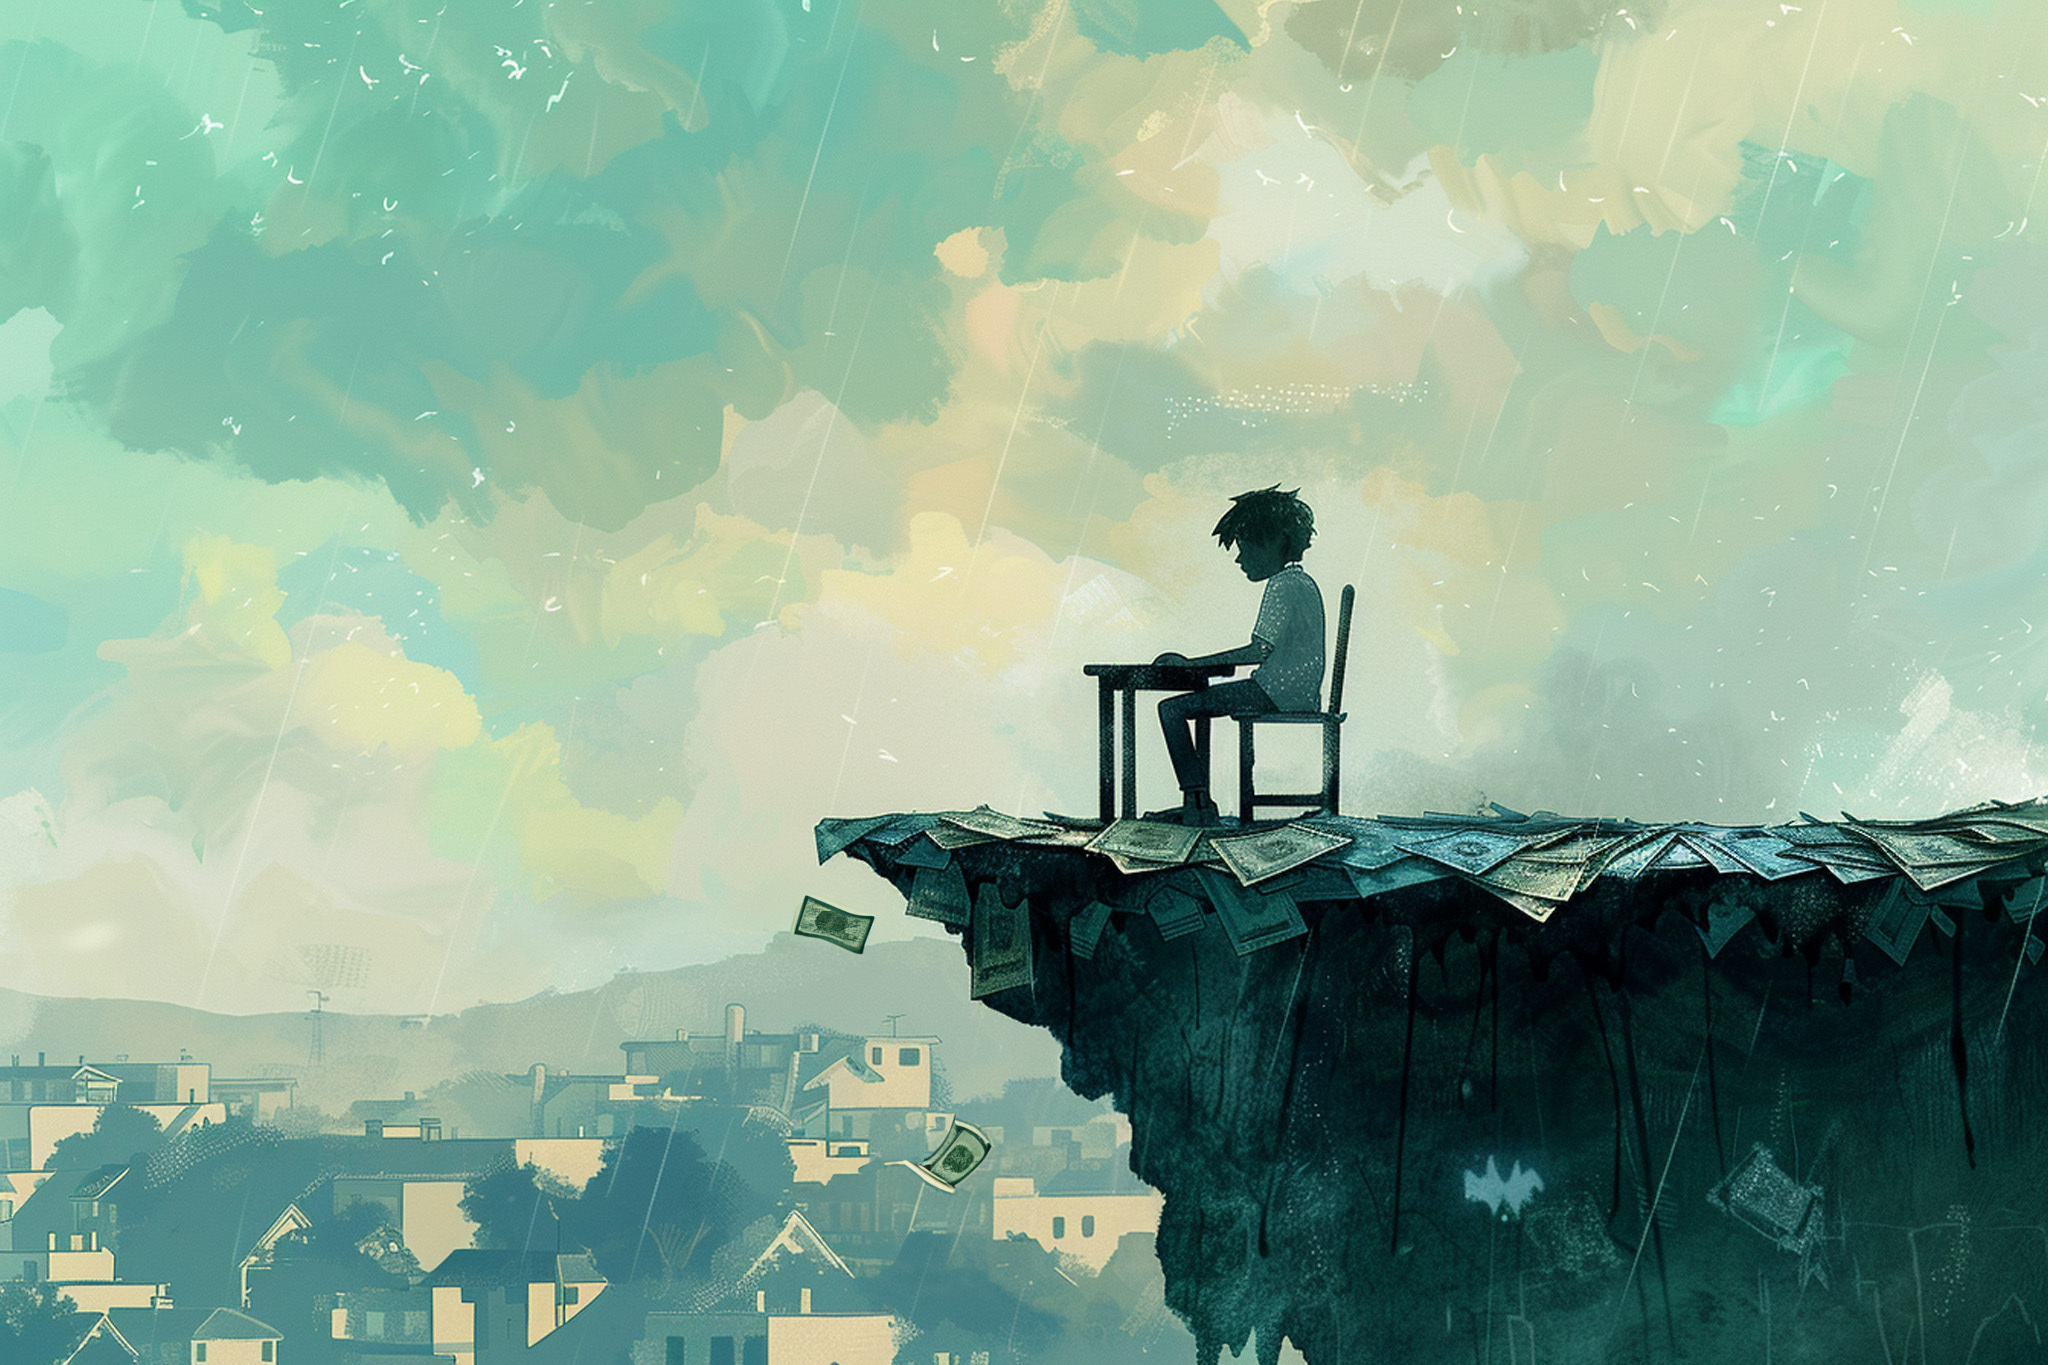 A person with dark hair sits on a chair at the edge of a cliff made of books, overlooking a dreamy, cloud-filled sky and a distant cityscape below.